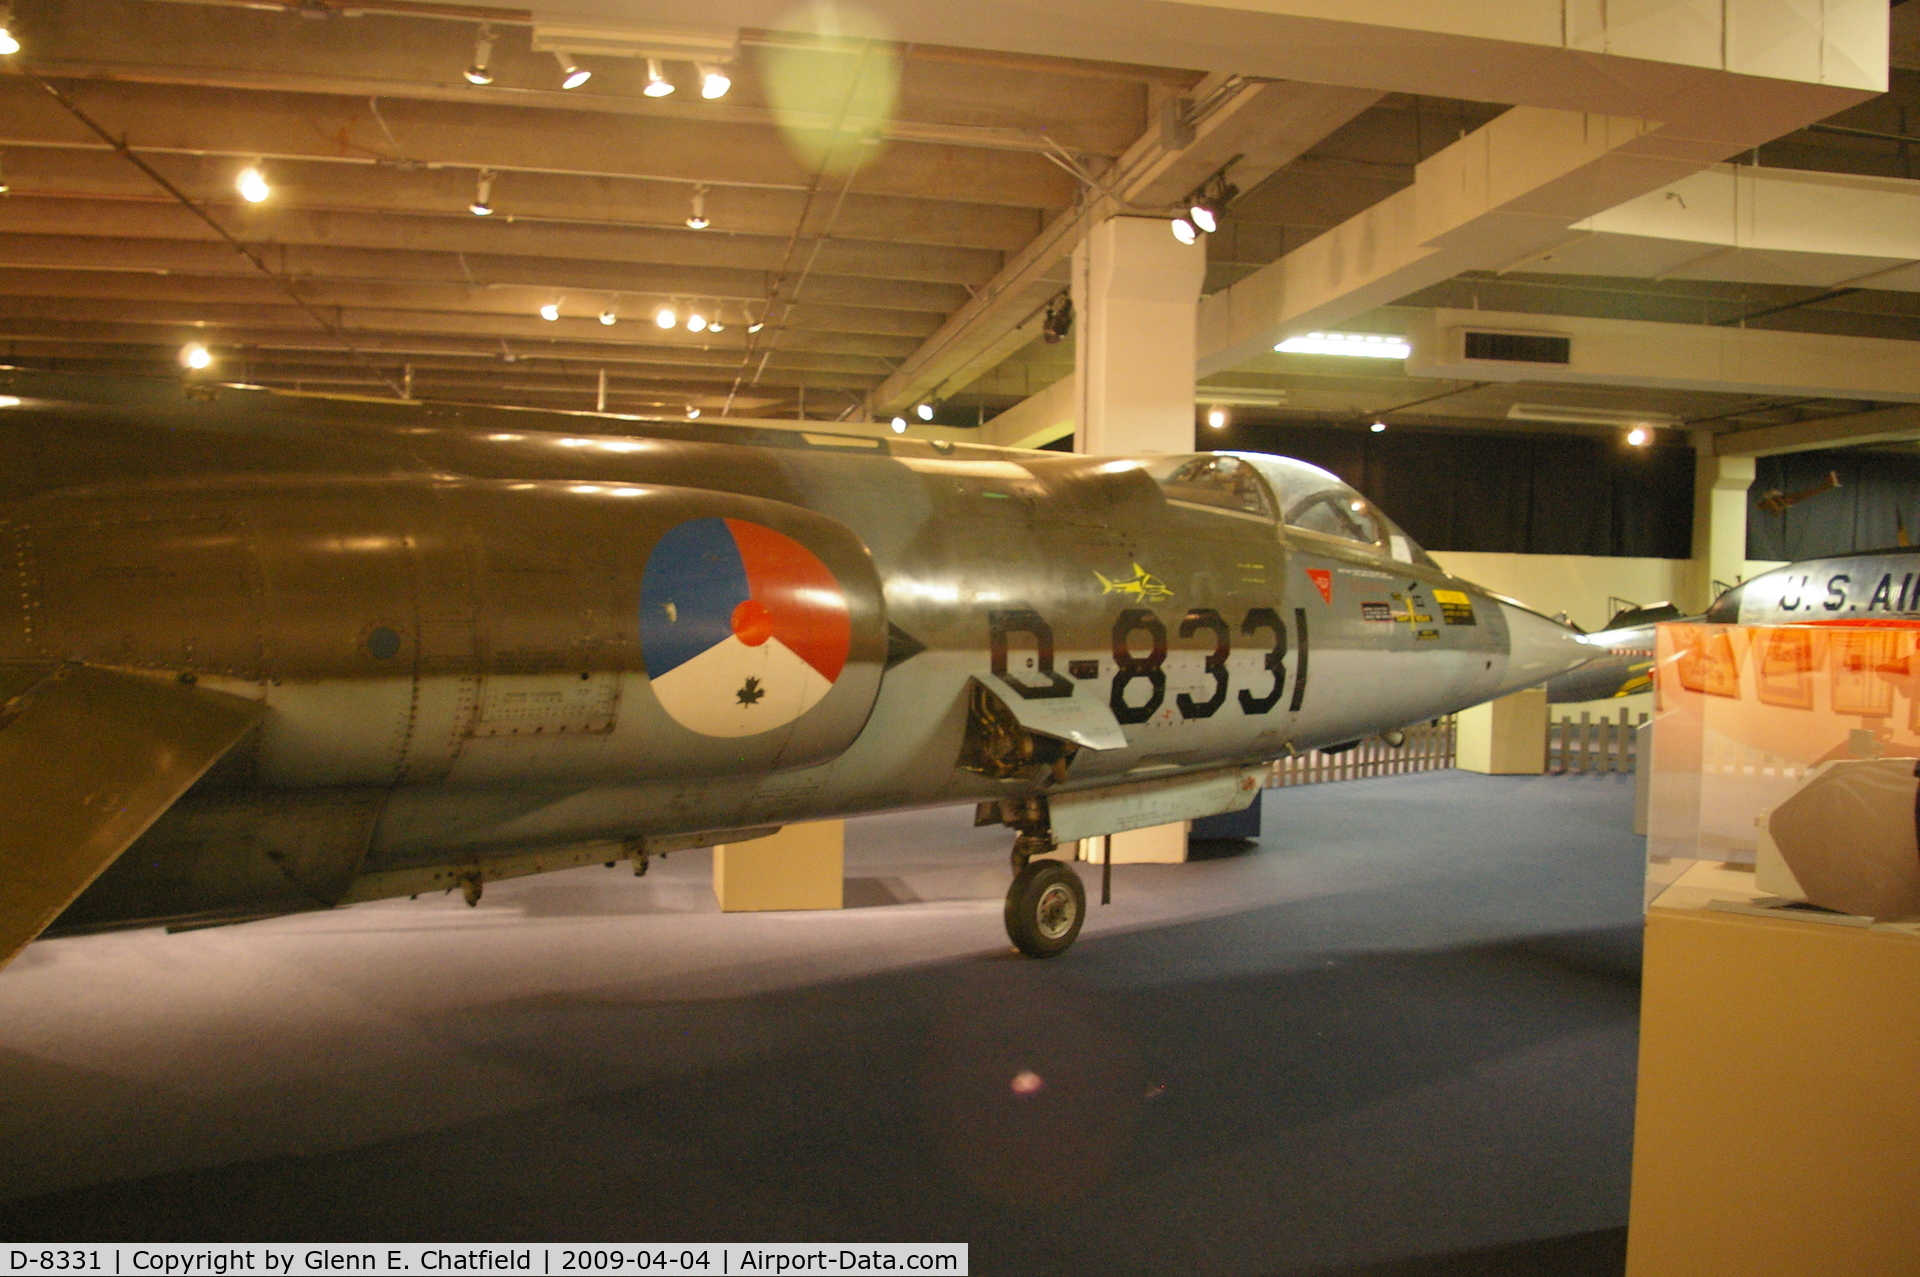 D-8331, Lockheed F-104G Starfighter C/N 683-8331, Displayed at the Science Museum of Oklahoma, Oklahoma City